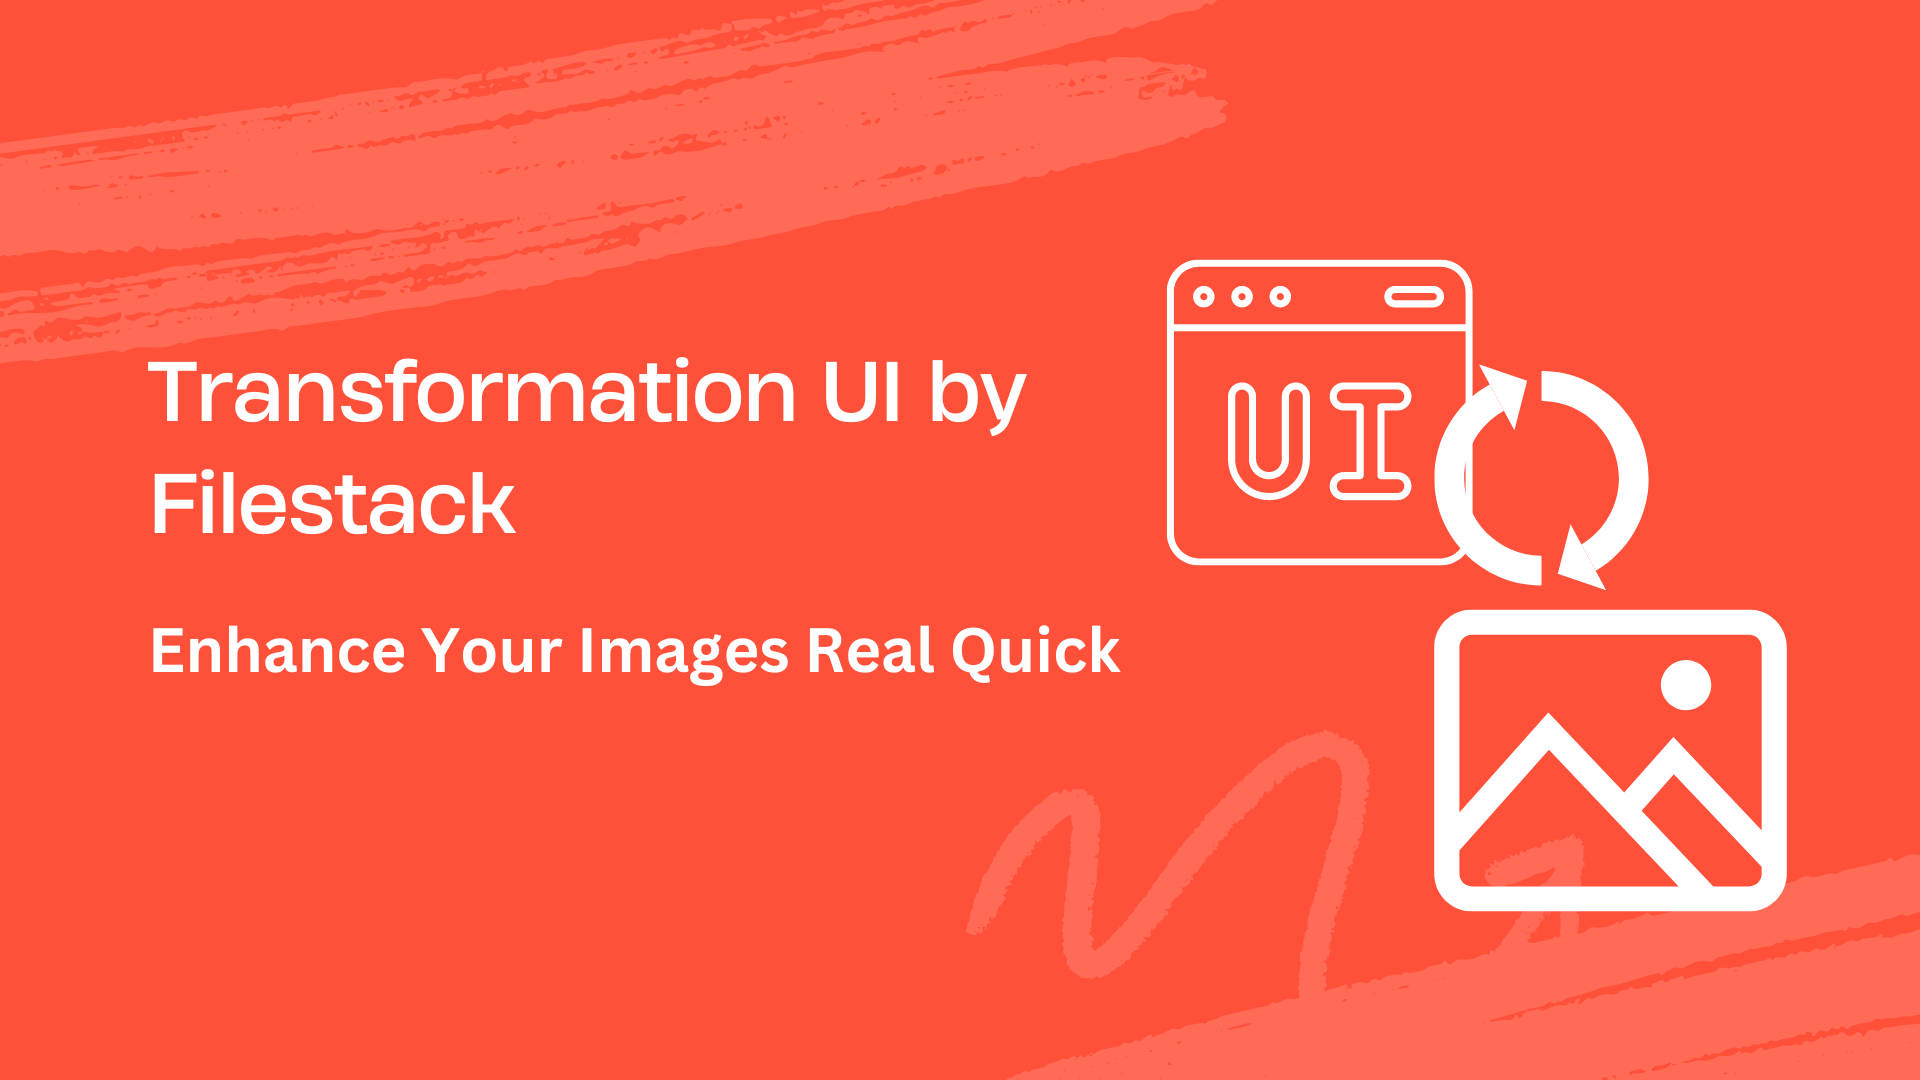 Transformation UI by Filestack - Enhance Your Images Real Quick